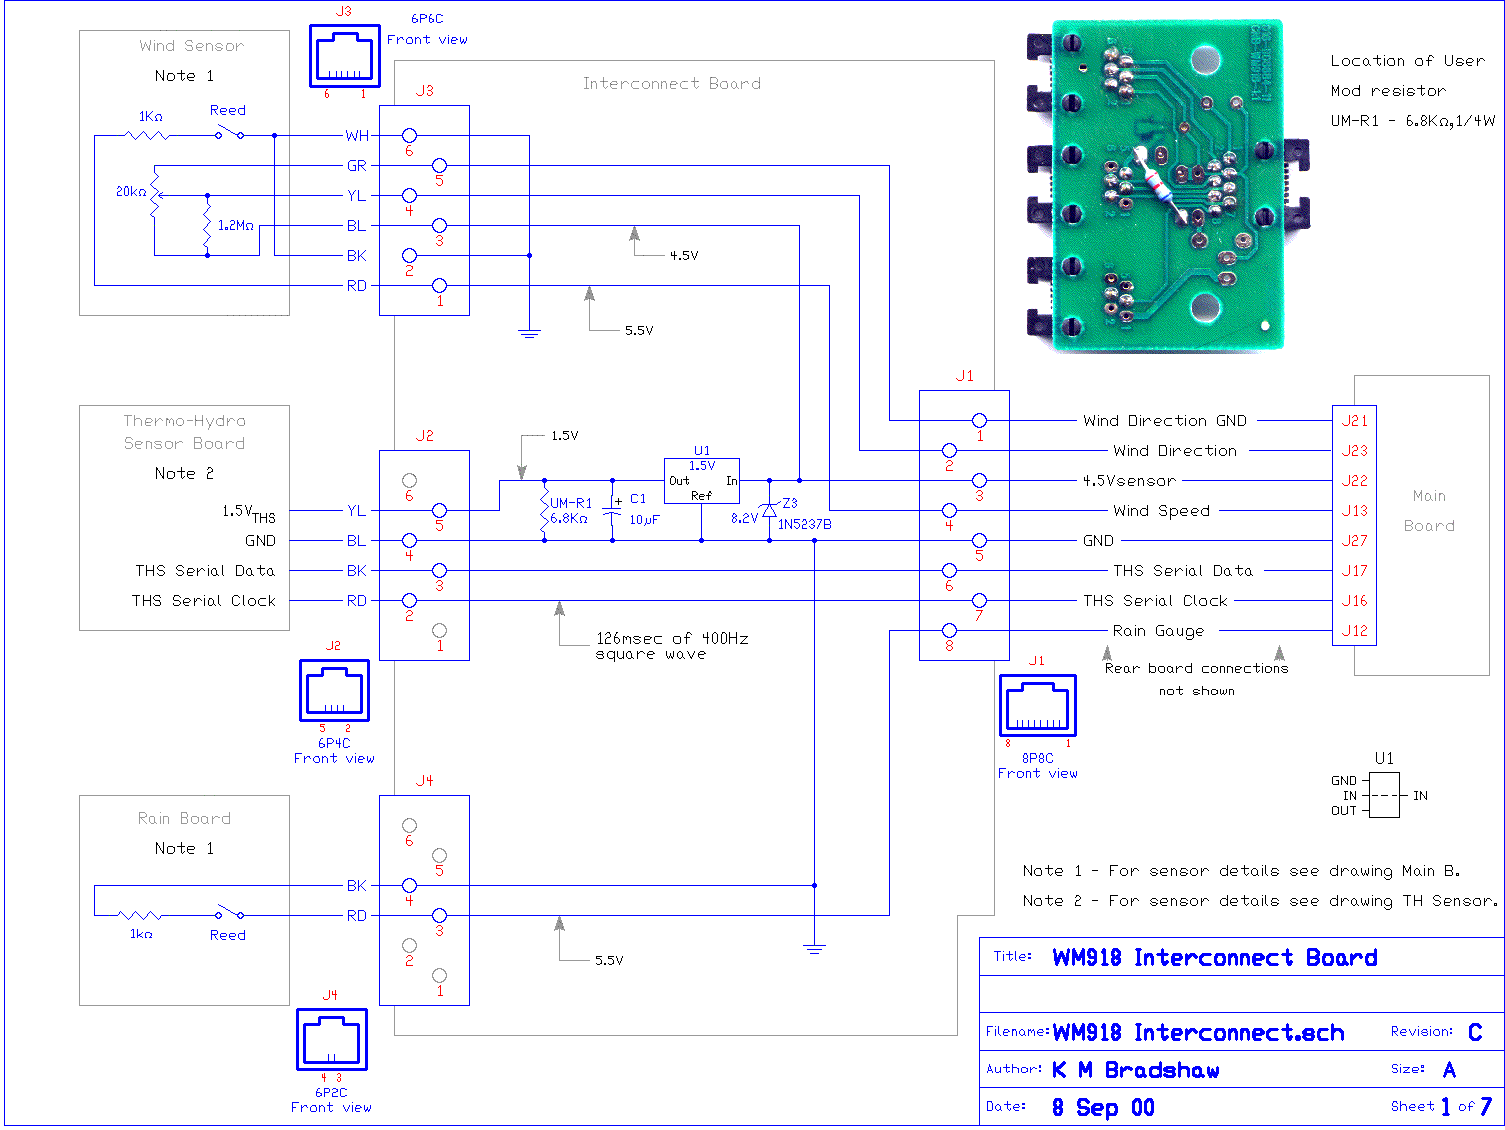 Schematic of the Interconnect PCB, Box1, as drawn by Kent KB1ESG